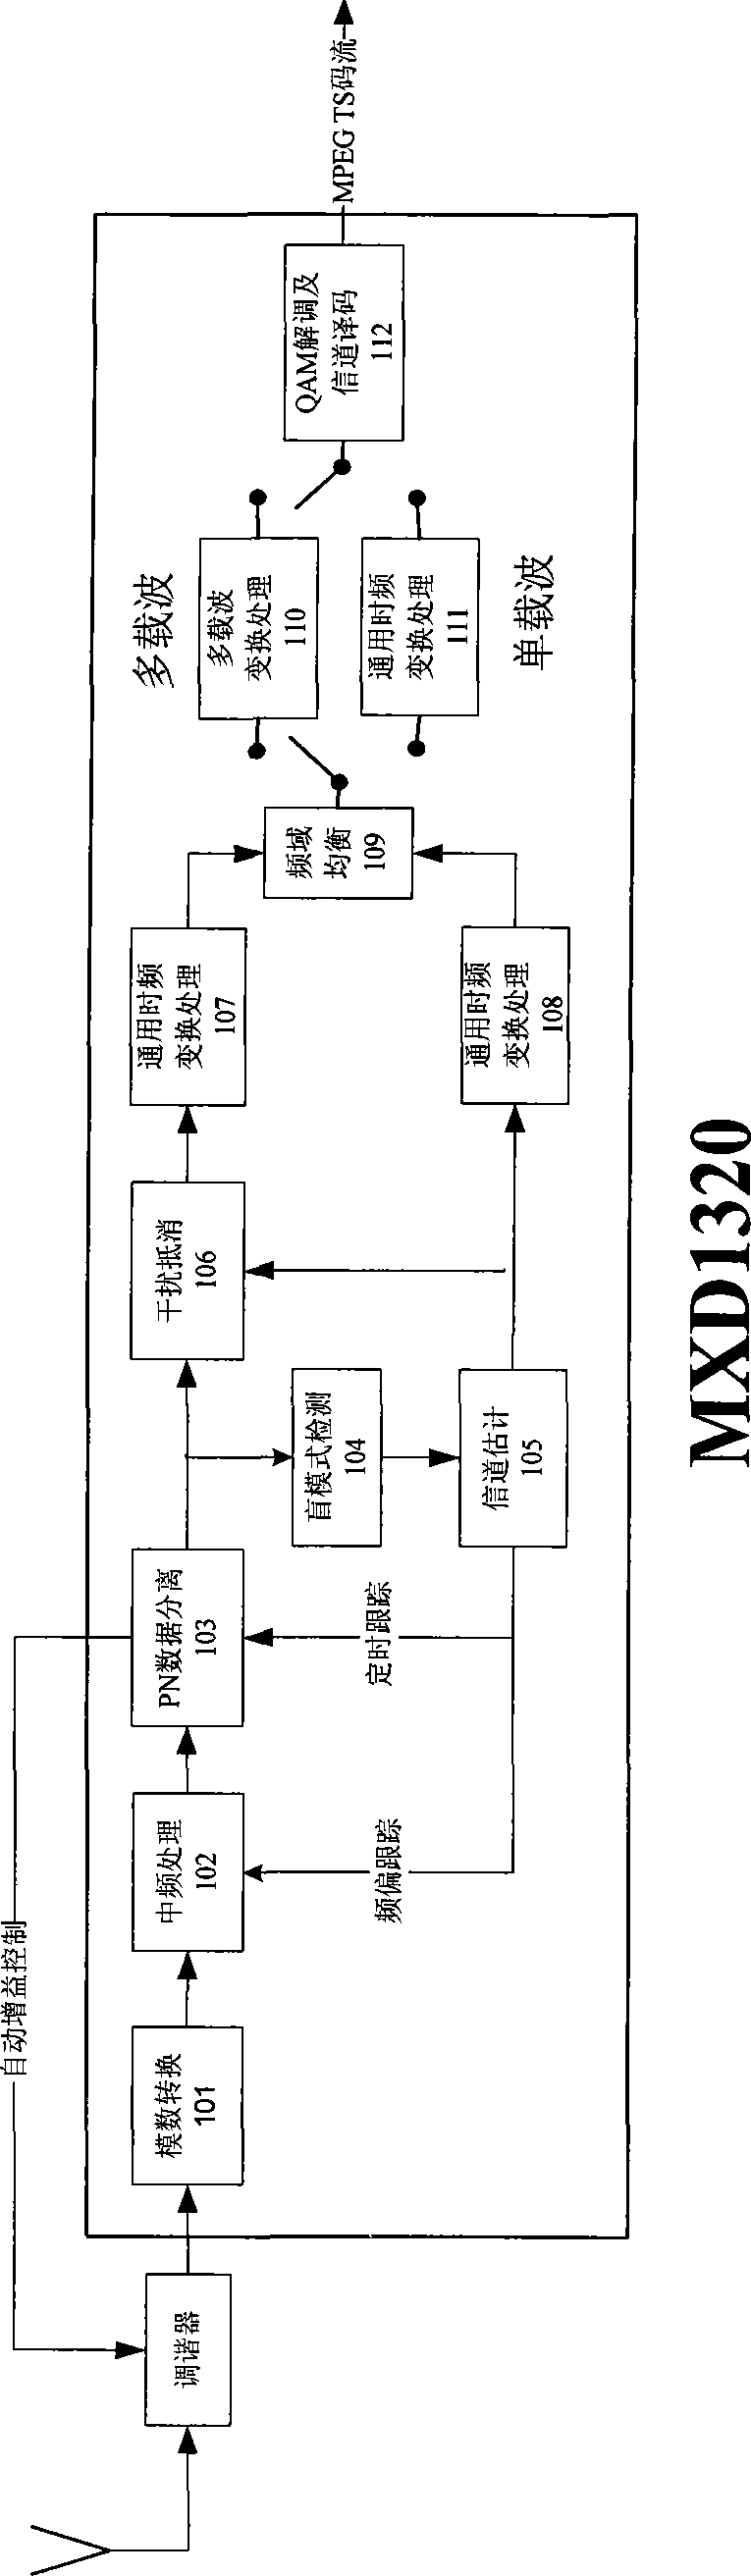 Fusion implementation architecture for national standard digital television ground broadcast demodulator